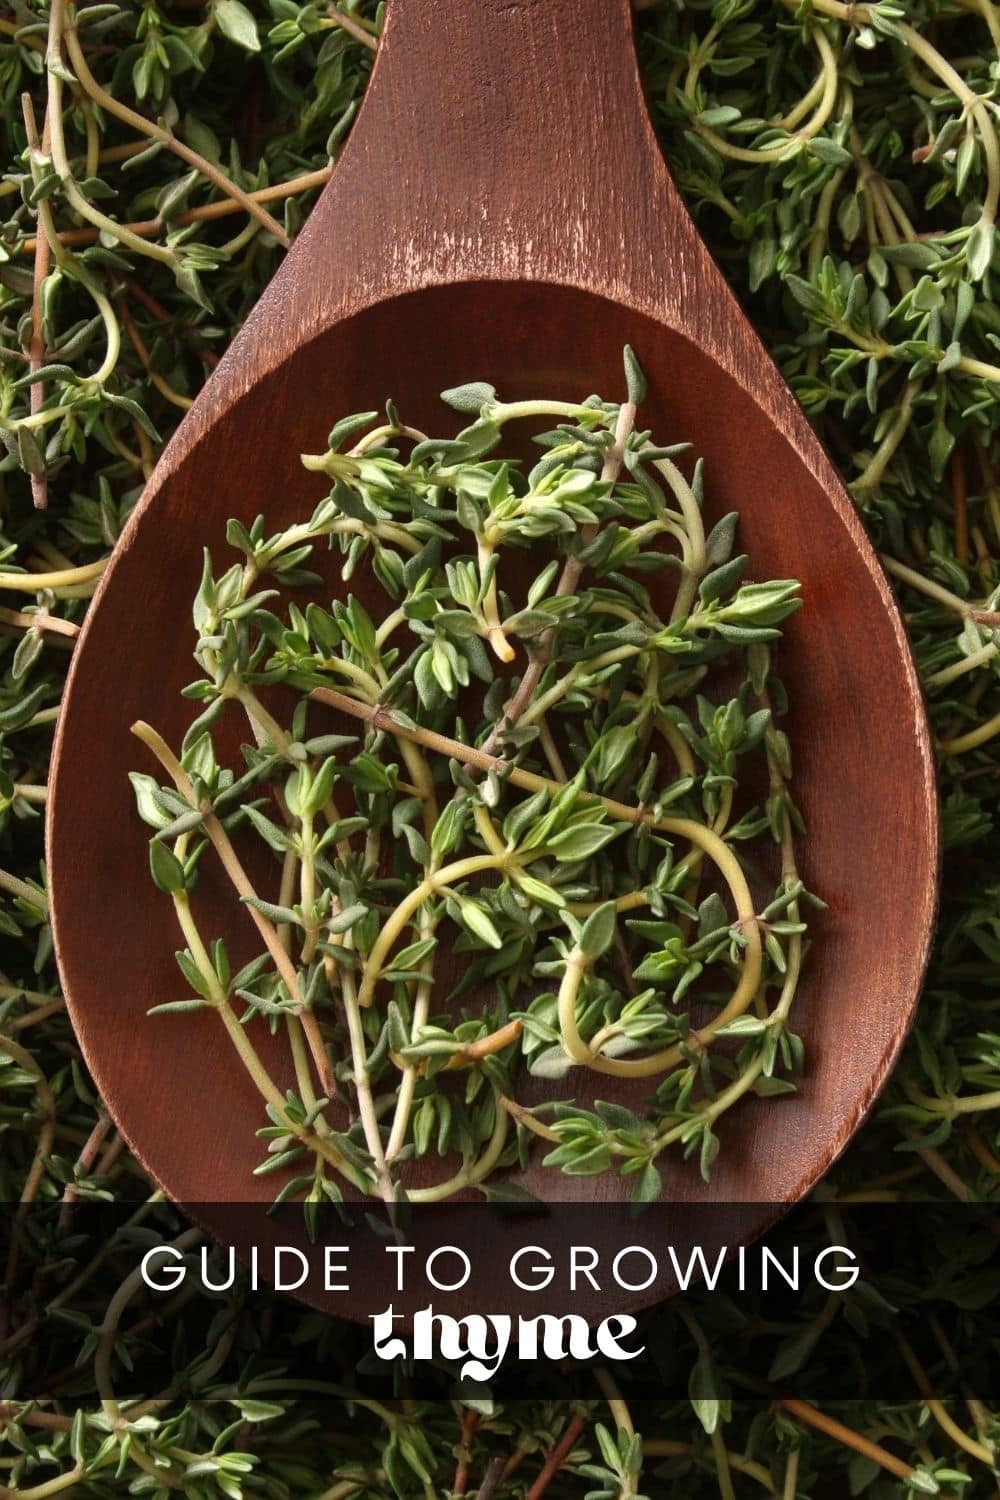 If you're looking for a drought-resistant herb that can be grown in containers, thyme is the perfect choice! It's super easy to grow, making it a great herb for beginner gardeners. Discover how to grow thyme and get ready to add a pop of flavor to your recipes!